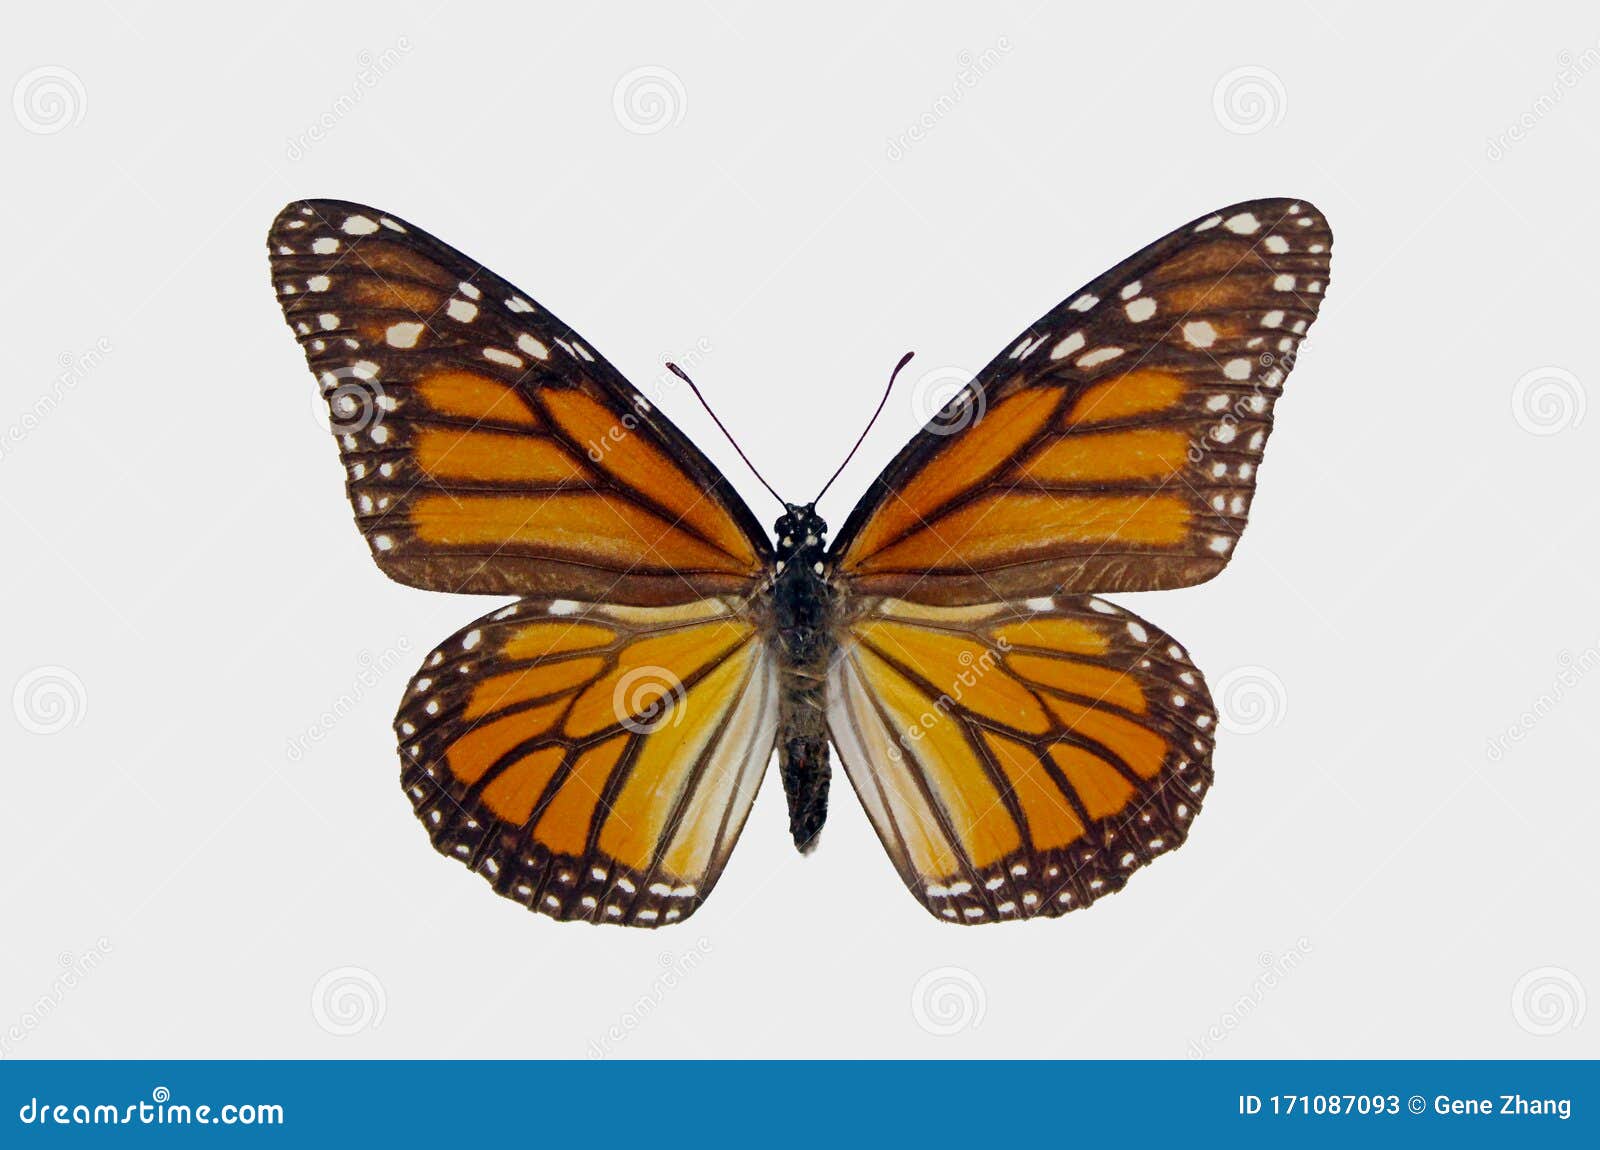 monarch butterfly  on white backgrounds, milkweed butterfly, nymphalidae